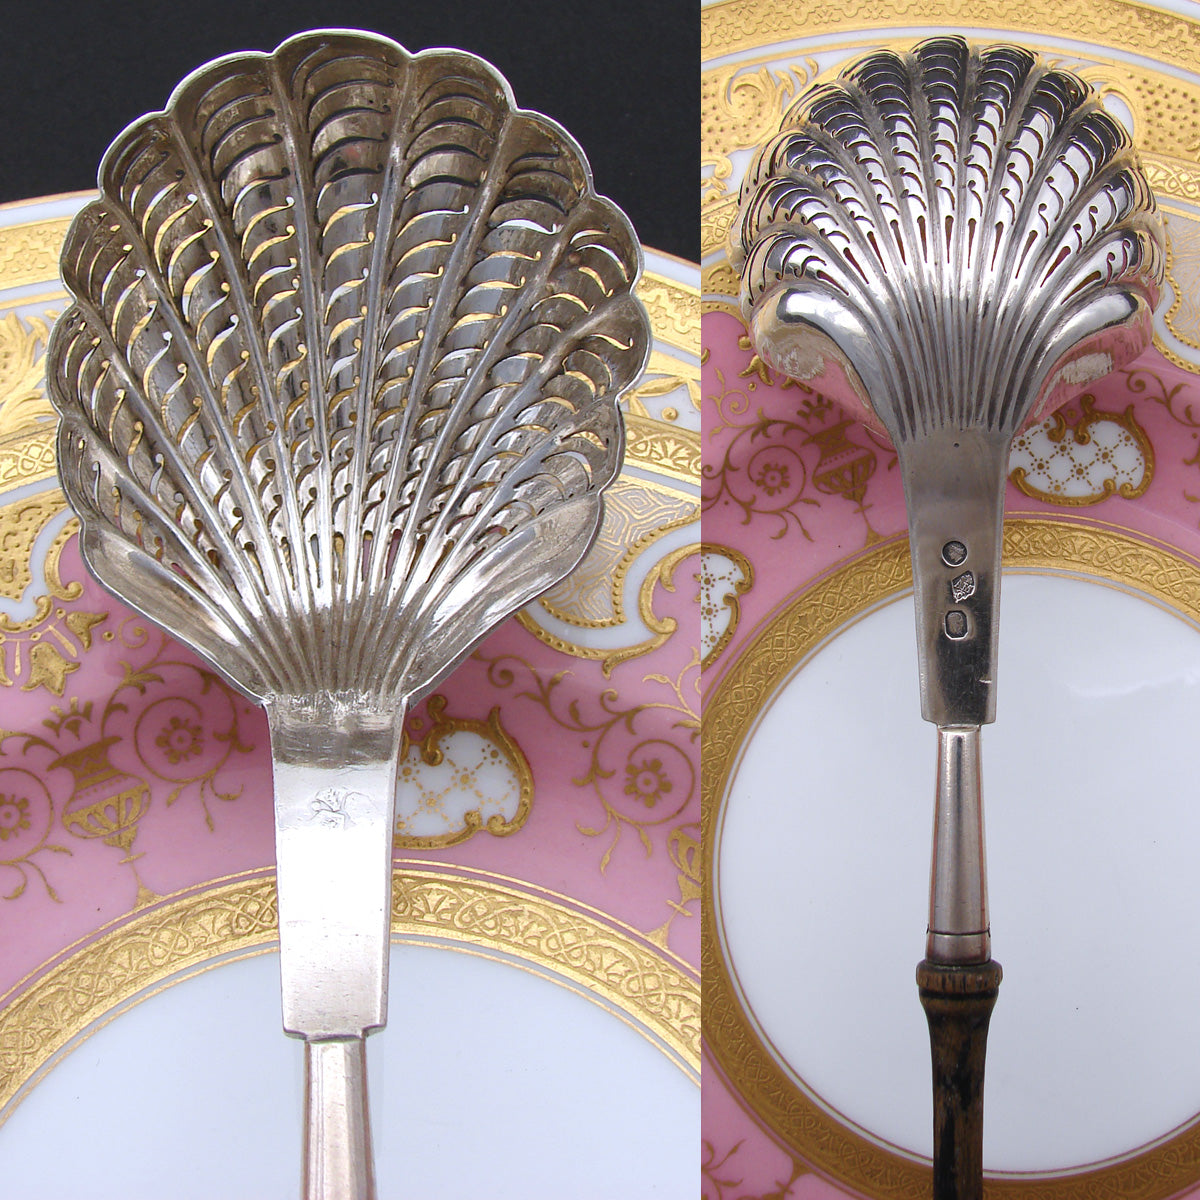 Antique French Sterling Silver 10.5" Condiments, Sugar Sifter or Muffineer, Seashell Shape